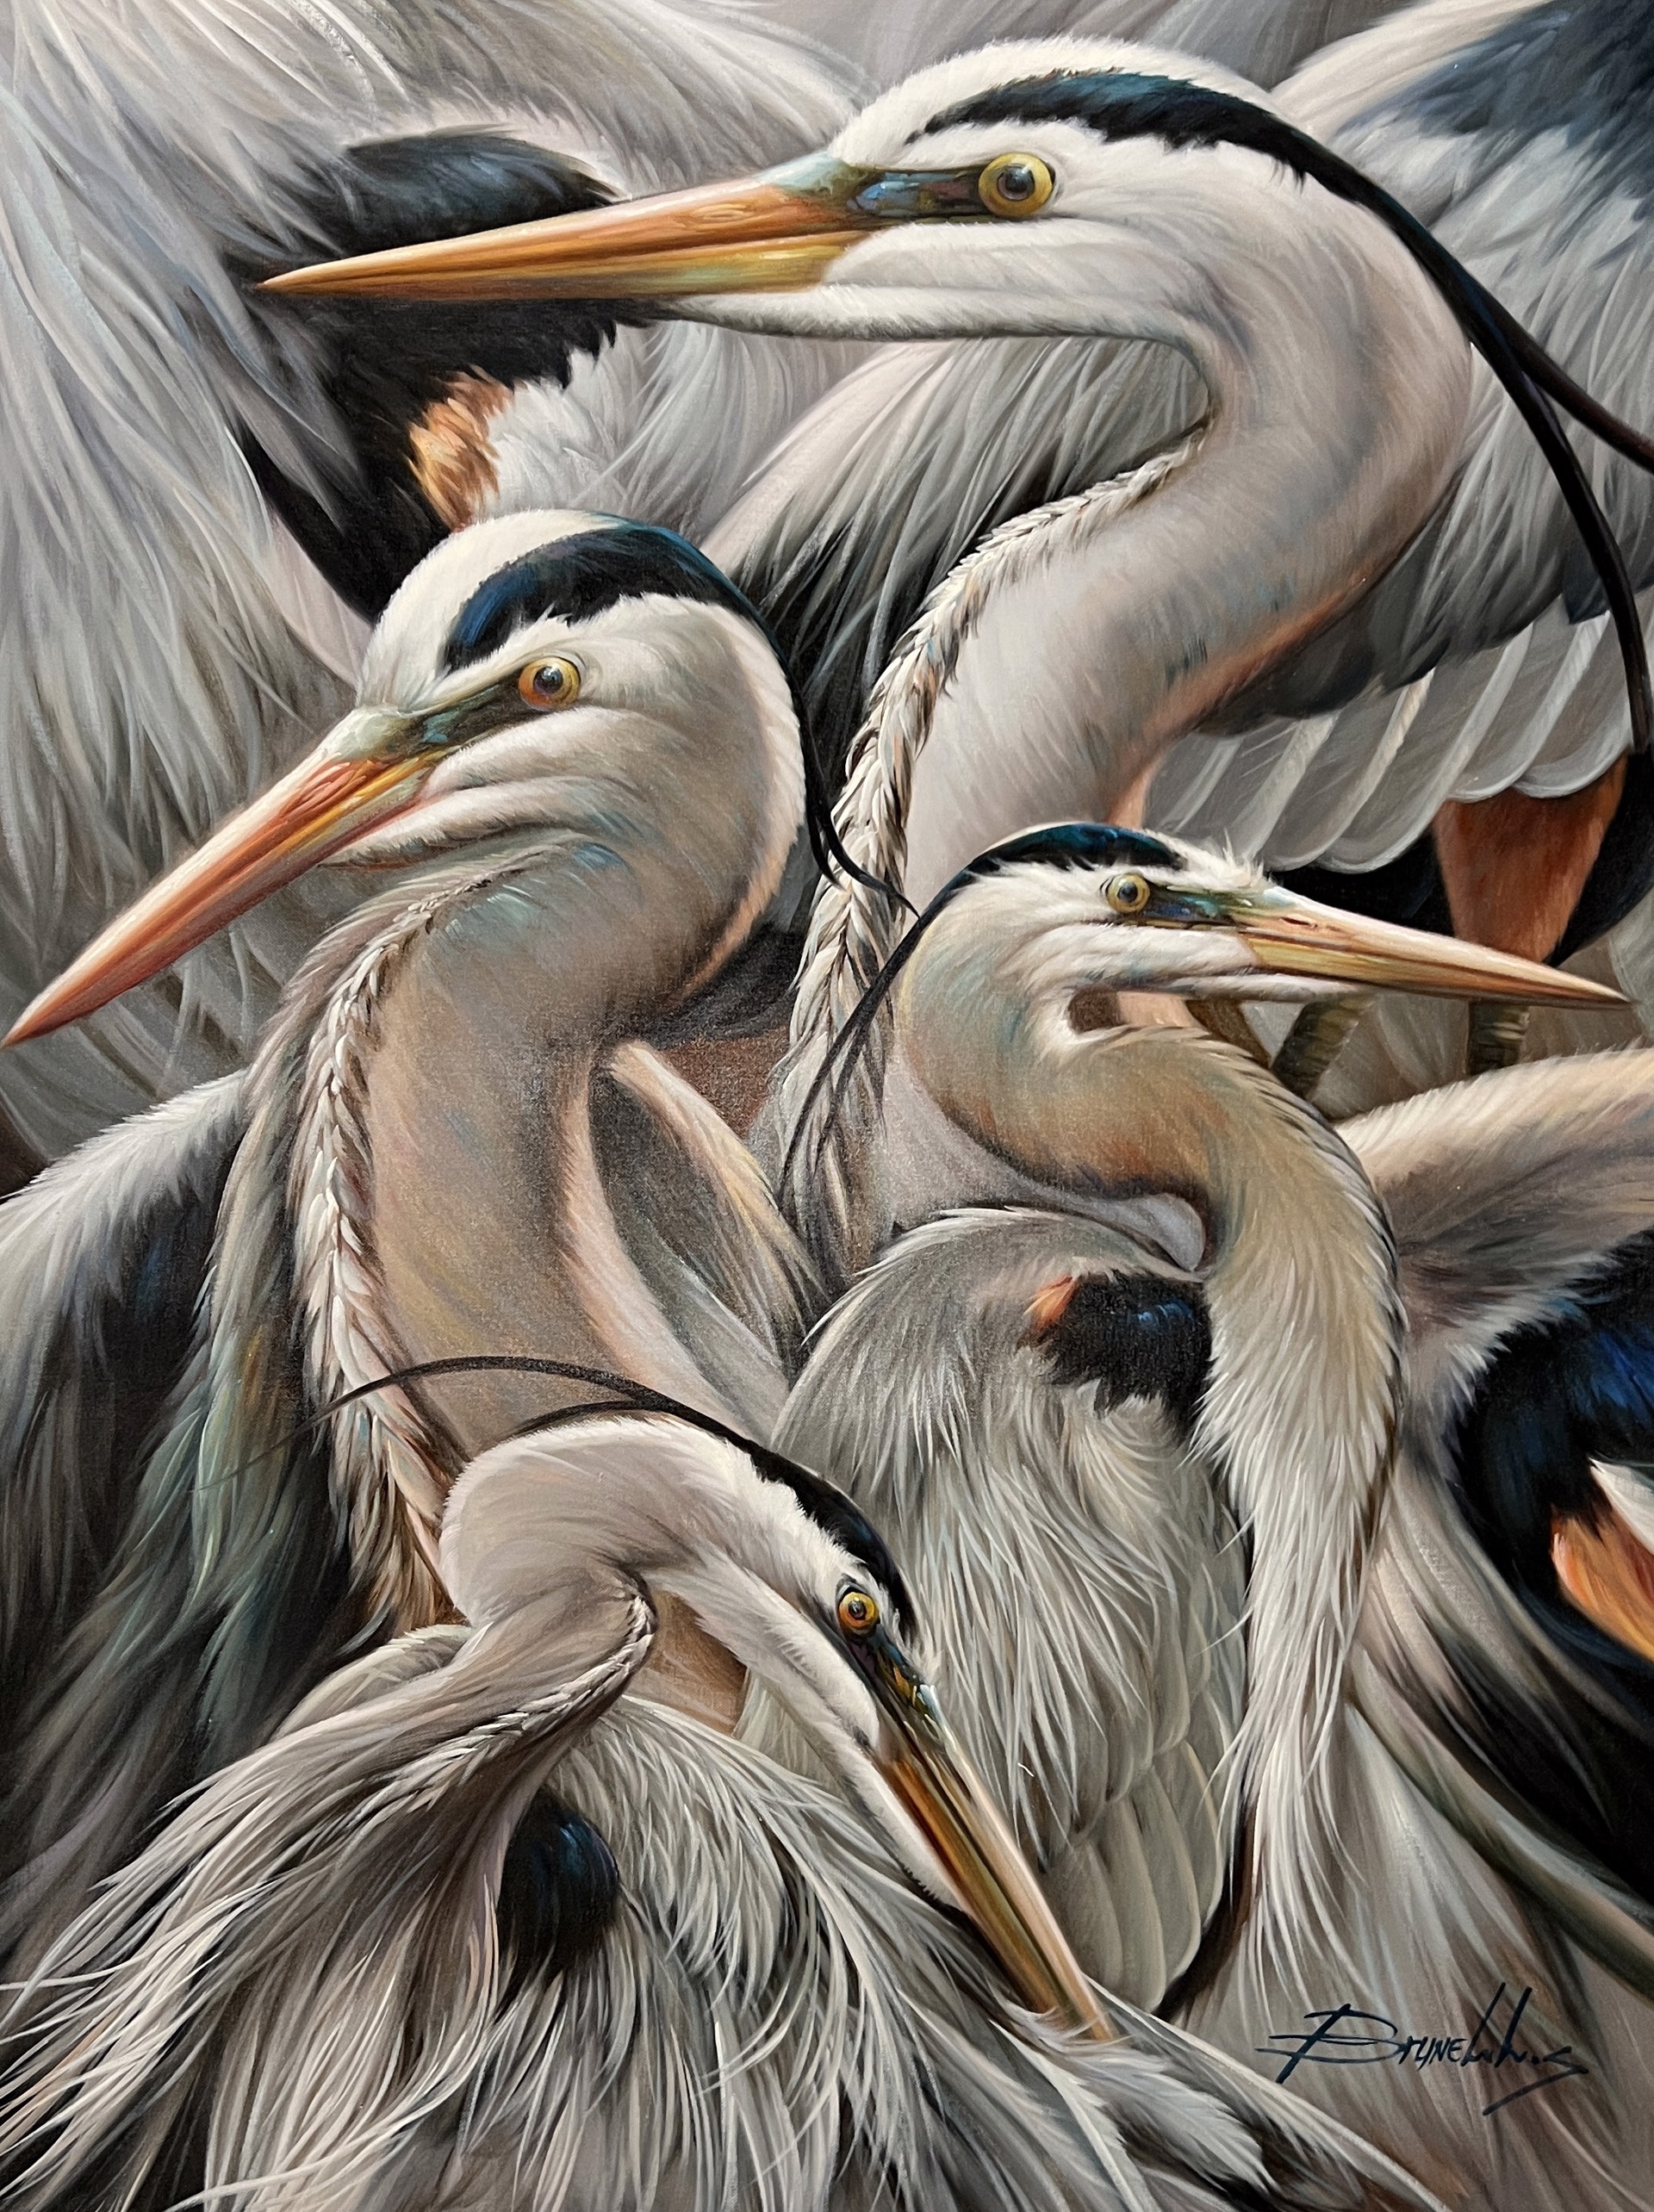 HERON GROUPING by BRUNELLY